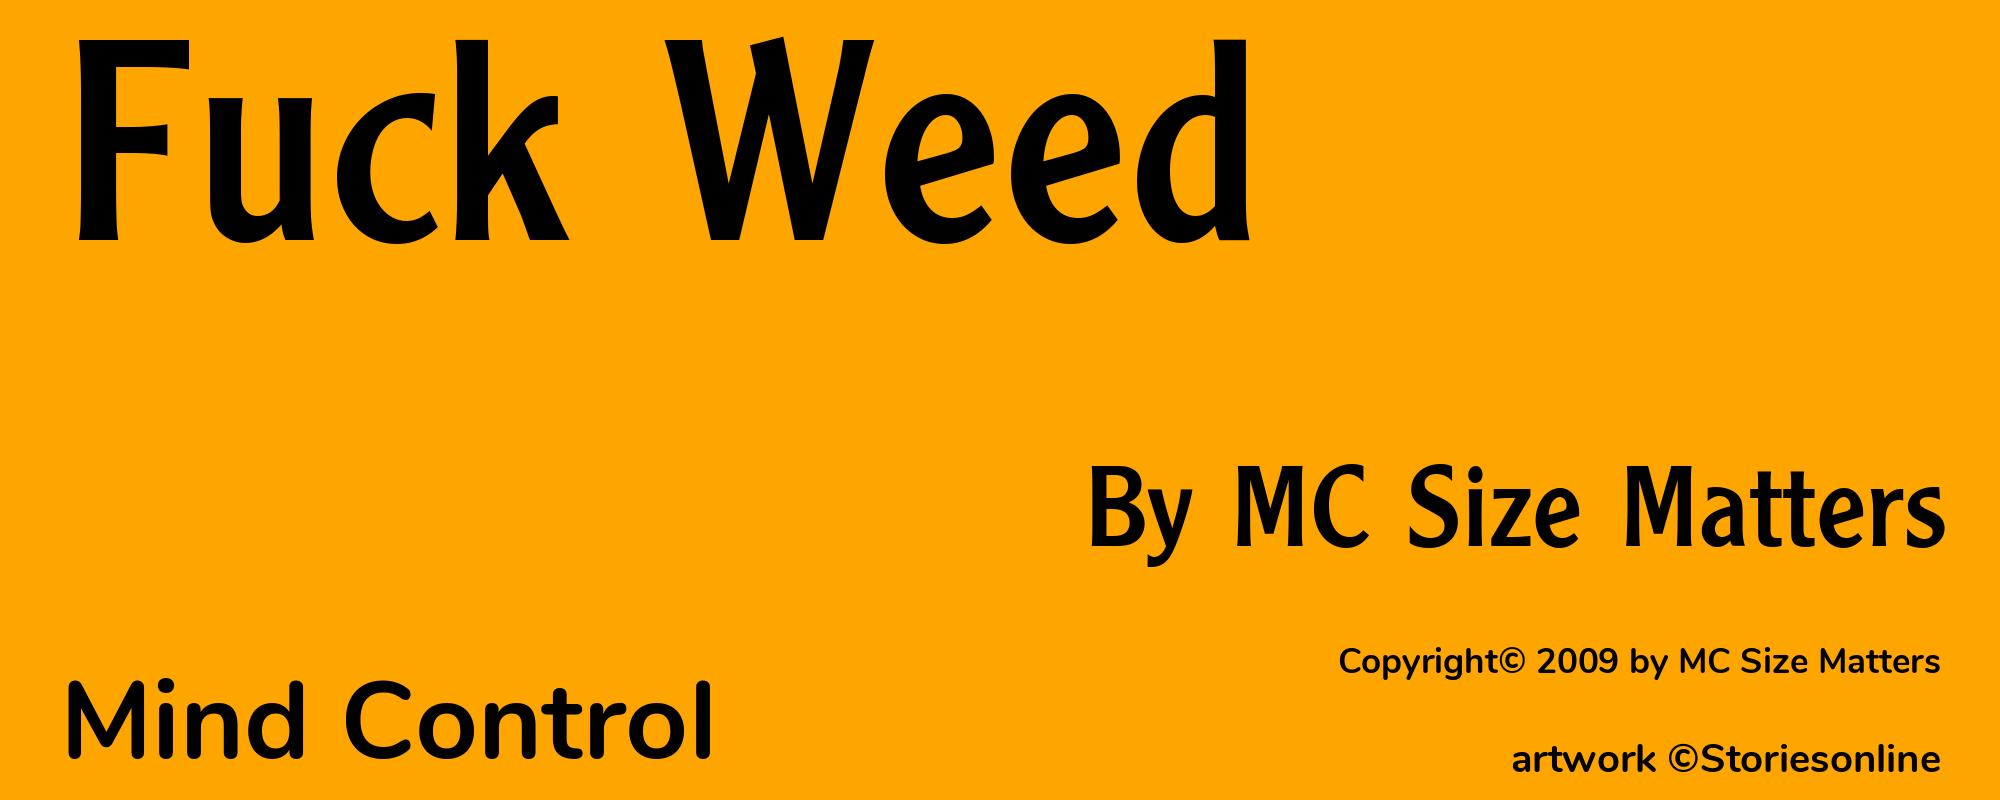 Fuck Weed - Cover